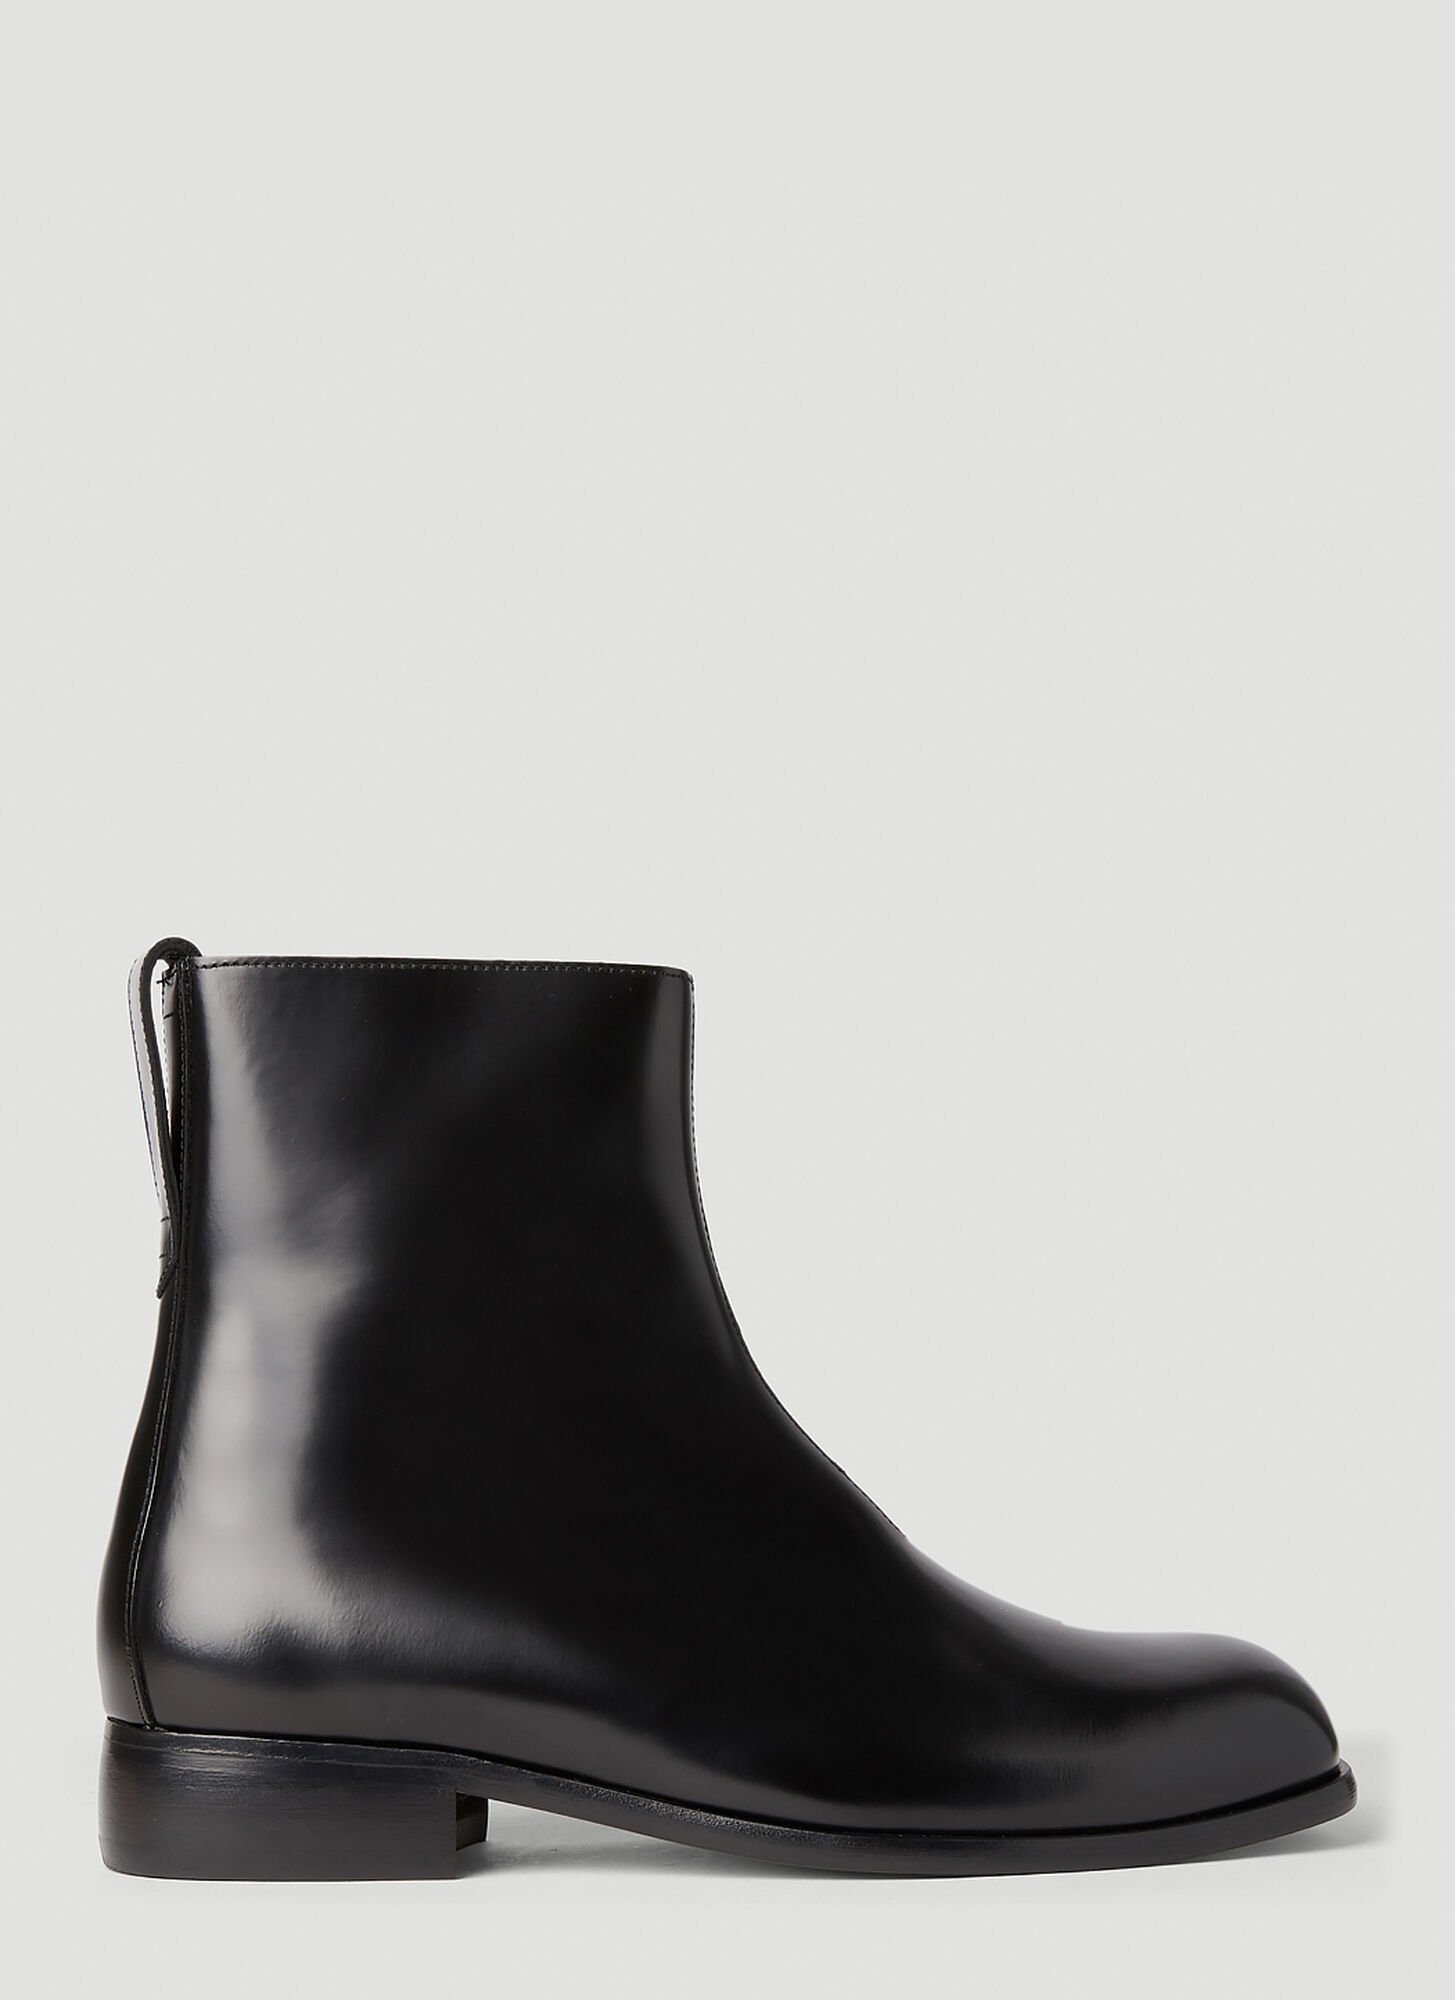 Shop Our Legacy Michaelis Boots In Black